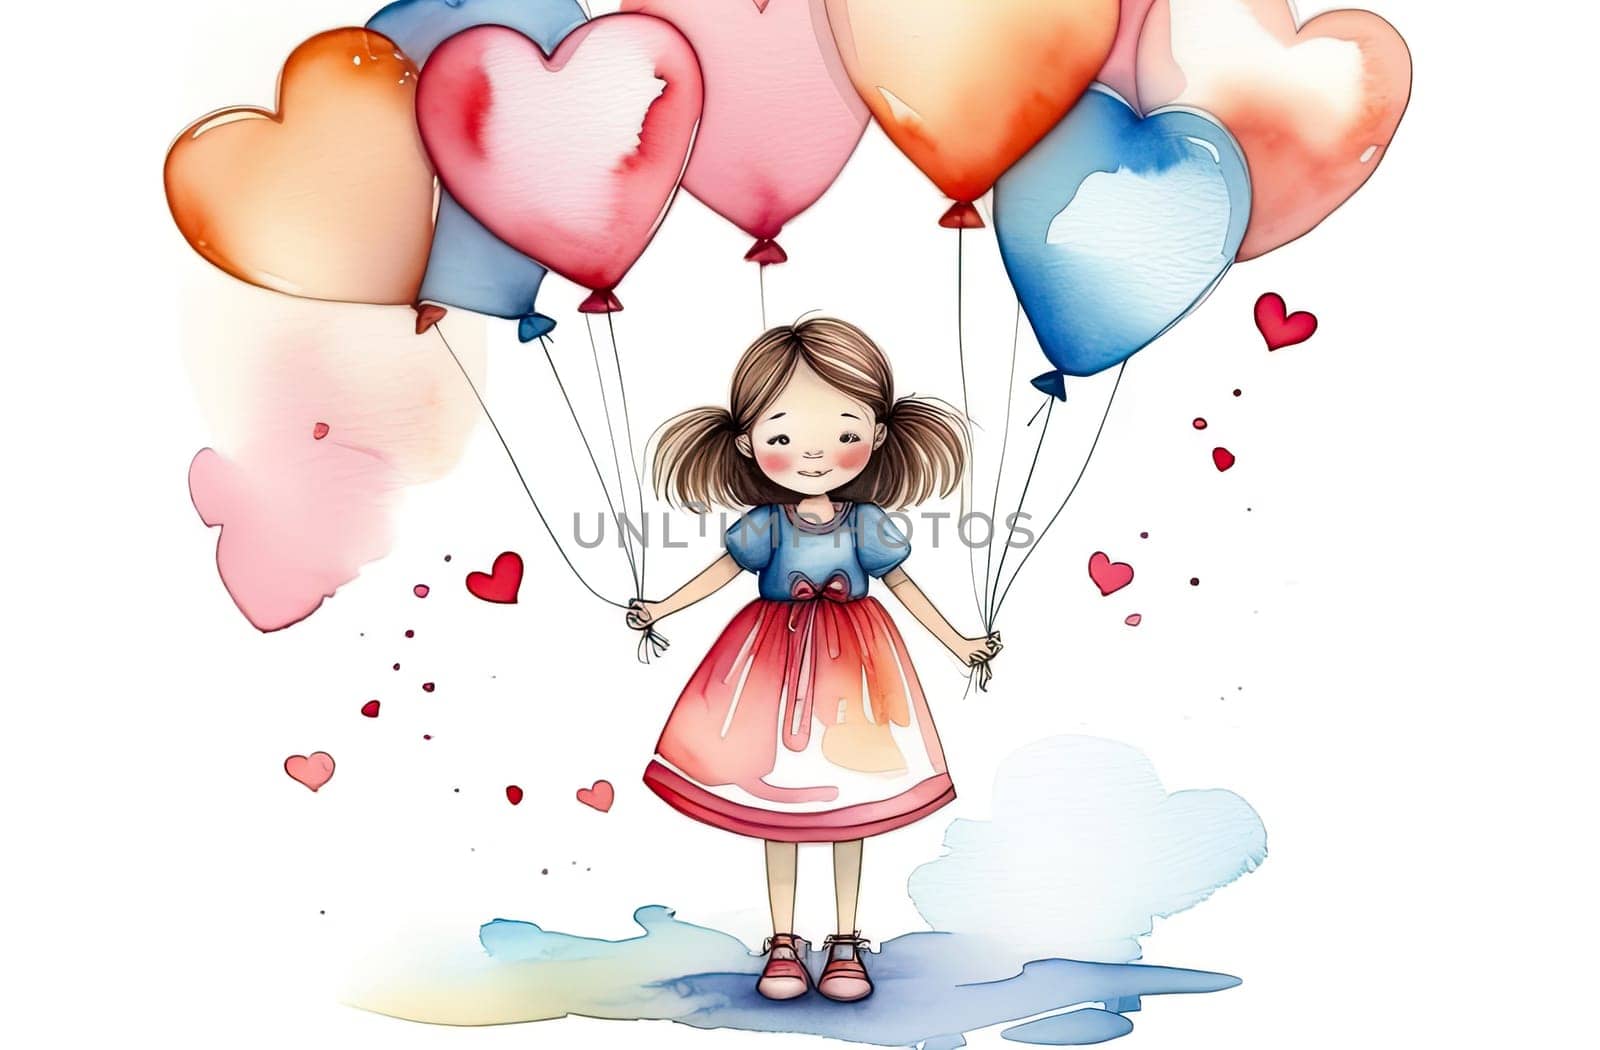 Little cute girl in a bright blue dress posing while holding balloons and flowers in her hands. by Proxima13